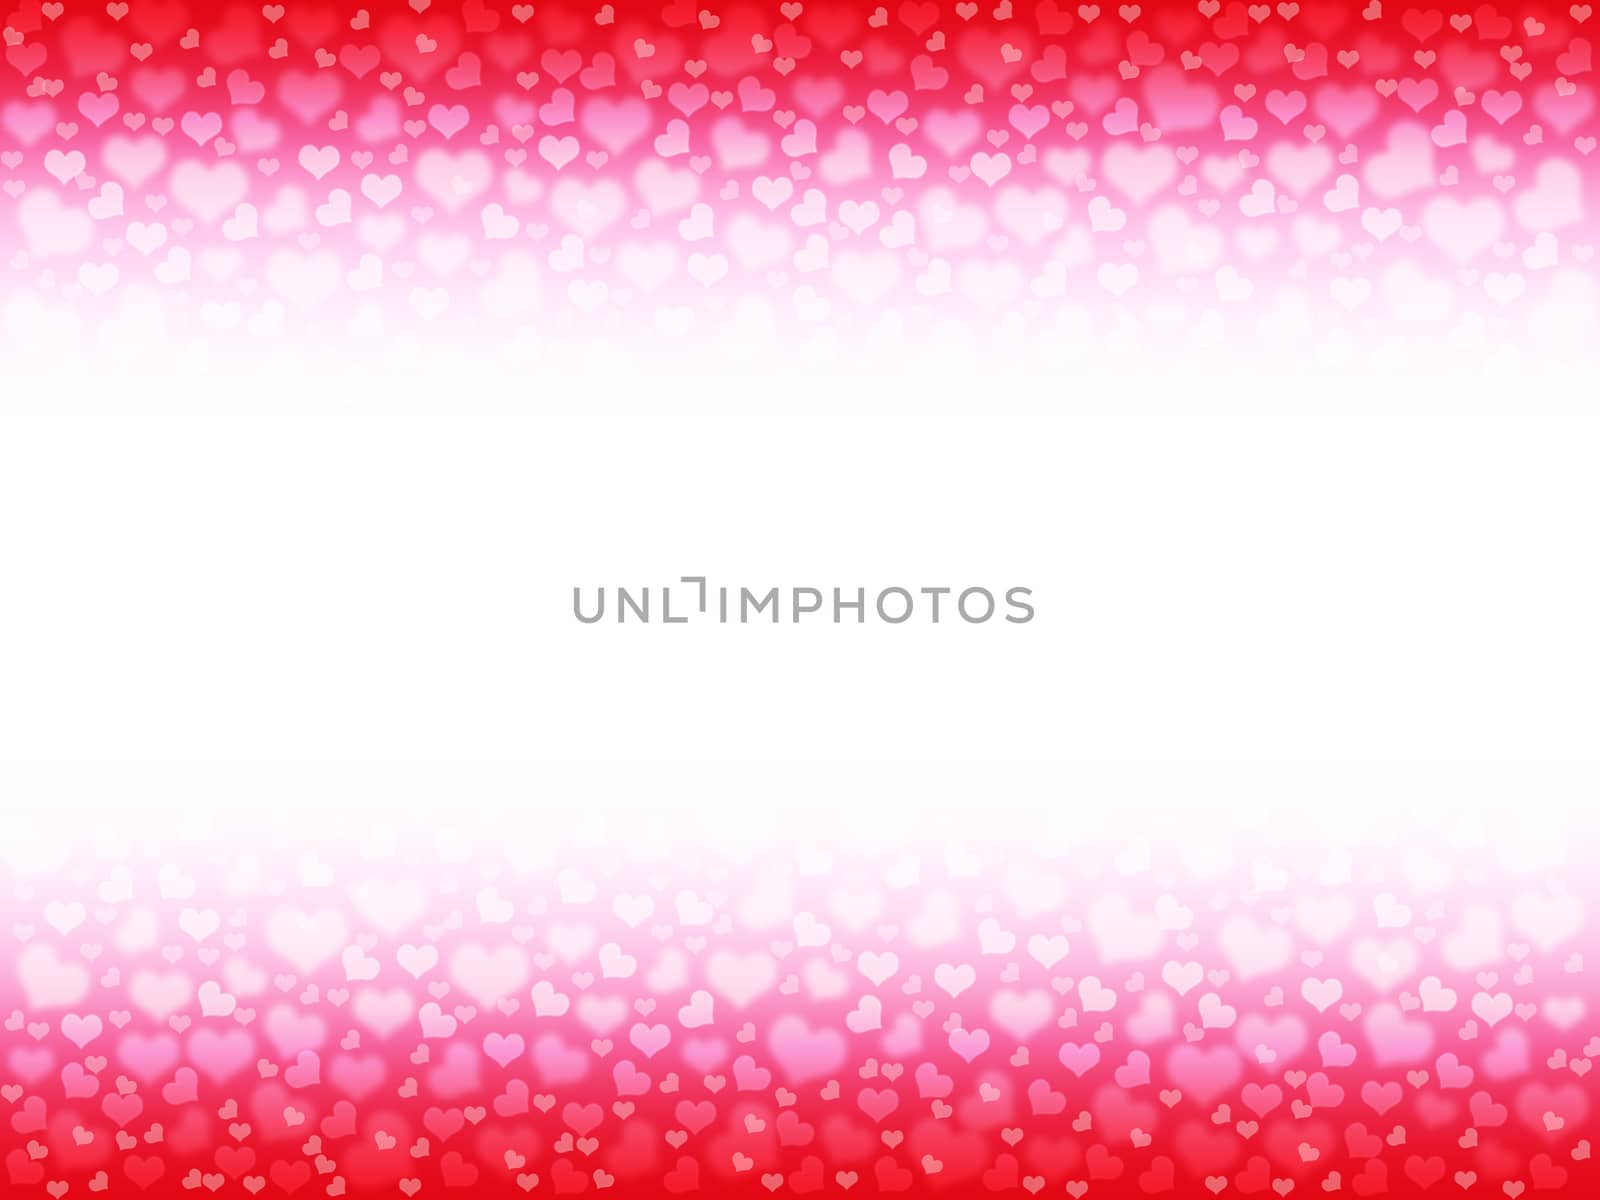 Illustration of a Valentines Day, heart bokeh background by gypsygraphy